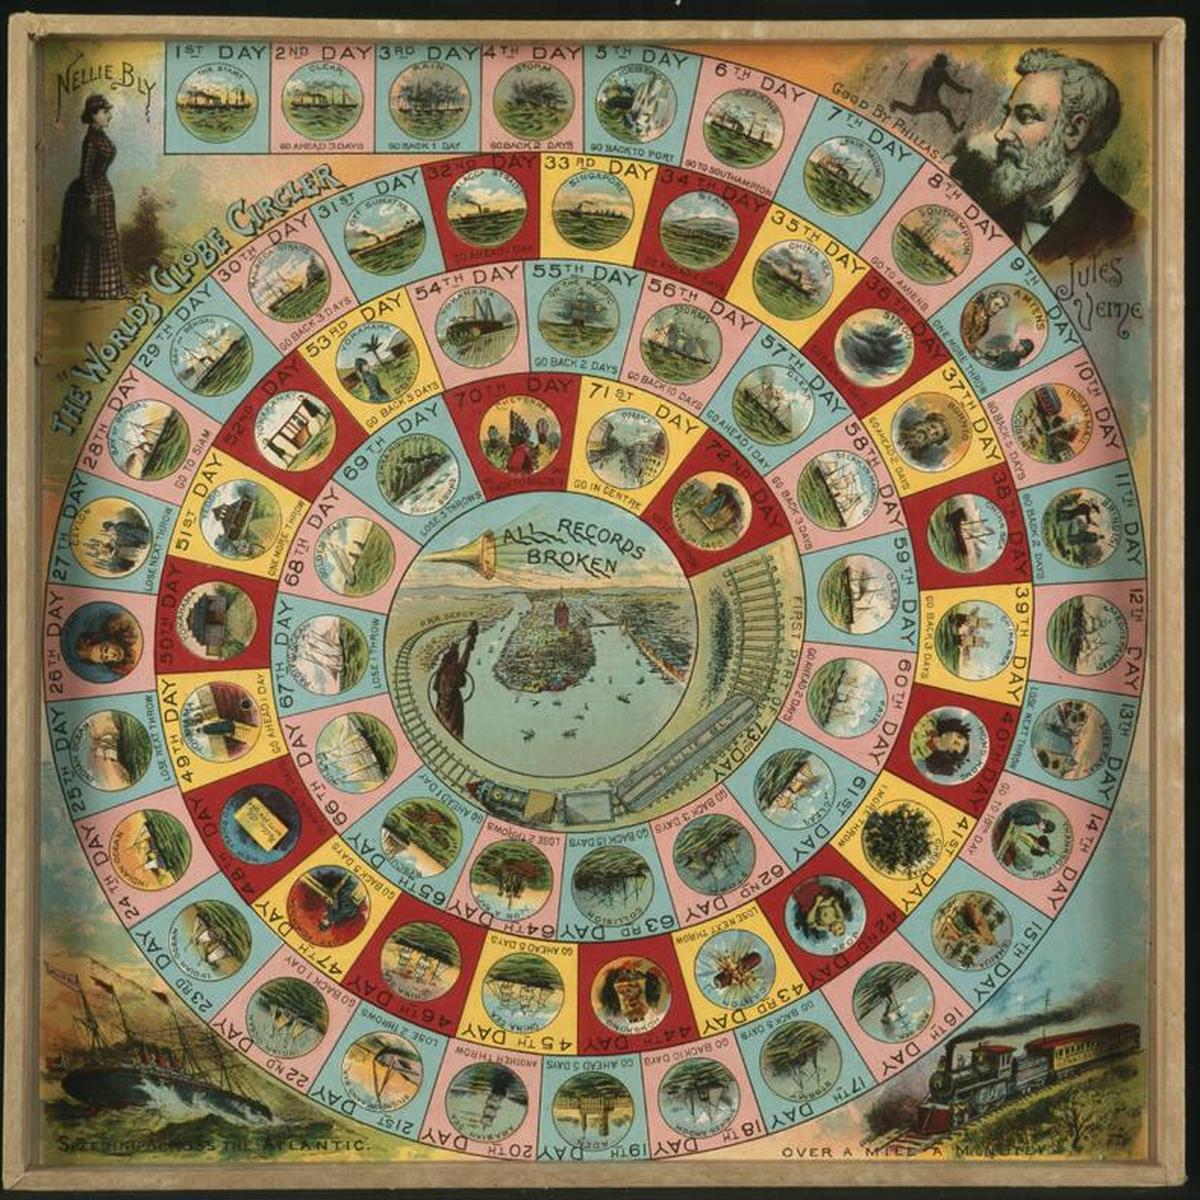 Round the World with Nellie Bly is a board game published in 1890 by McLoughlin Bros. of New York to commemorate journalist Nellie Bly’s record-breaking trip around the world in 1889–1890.